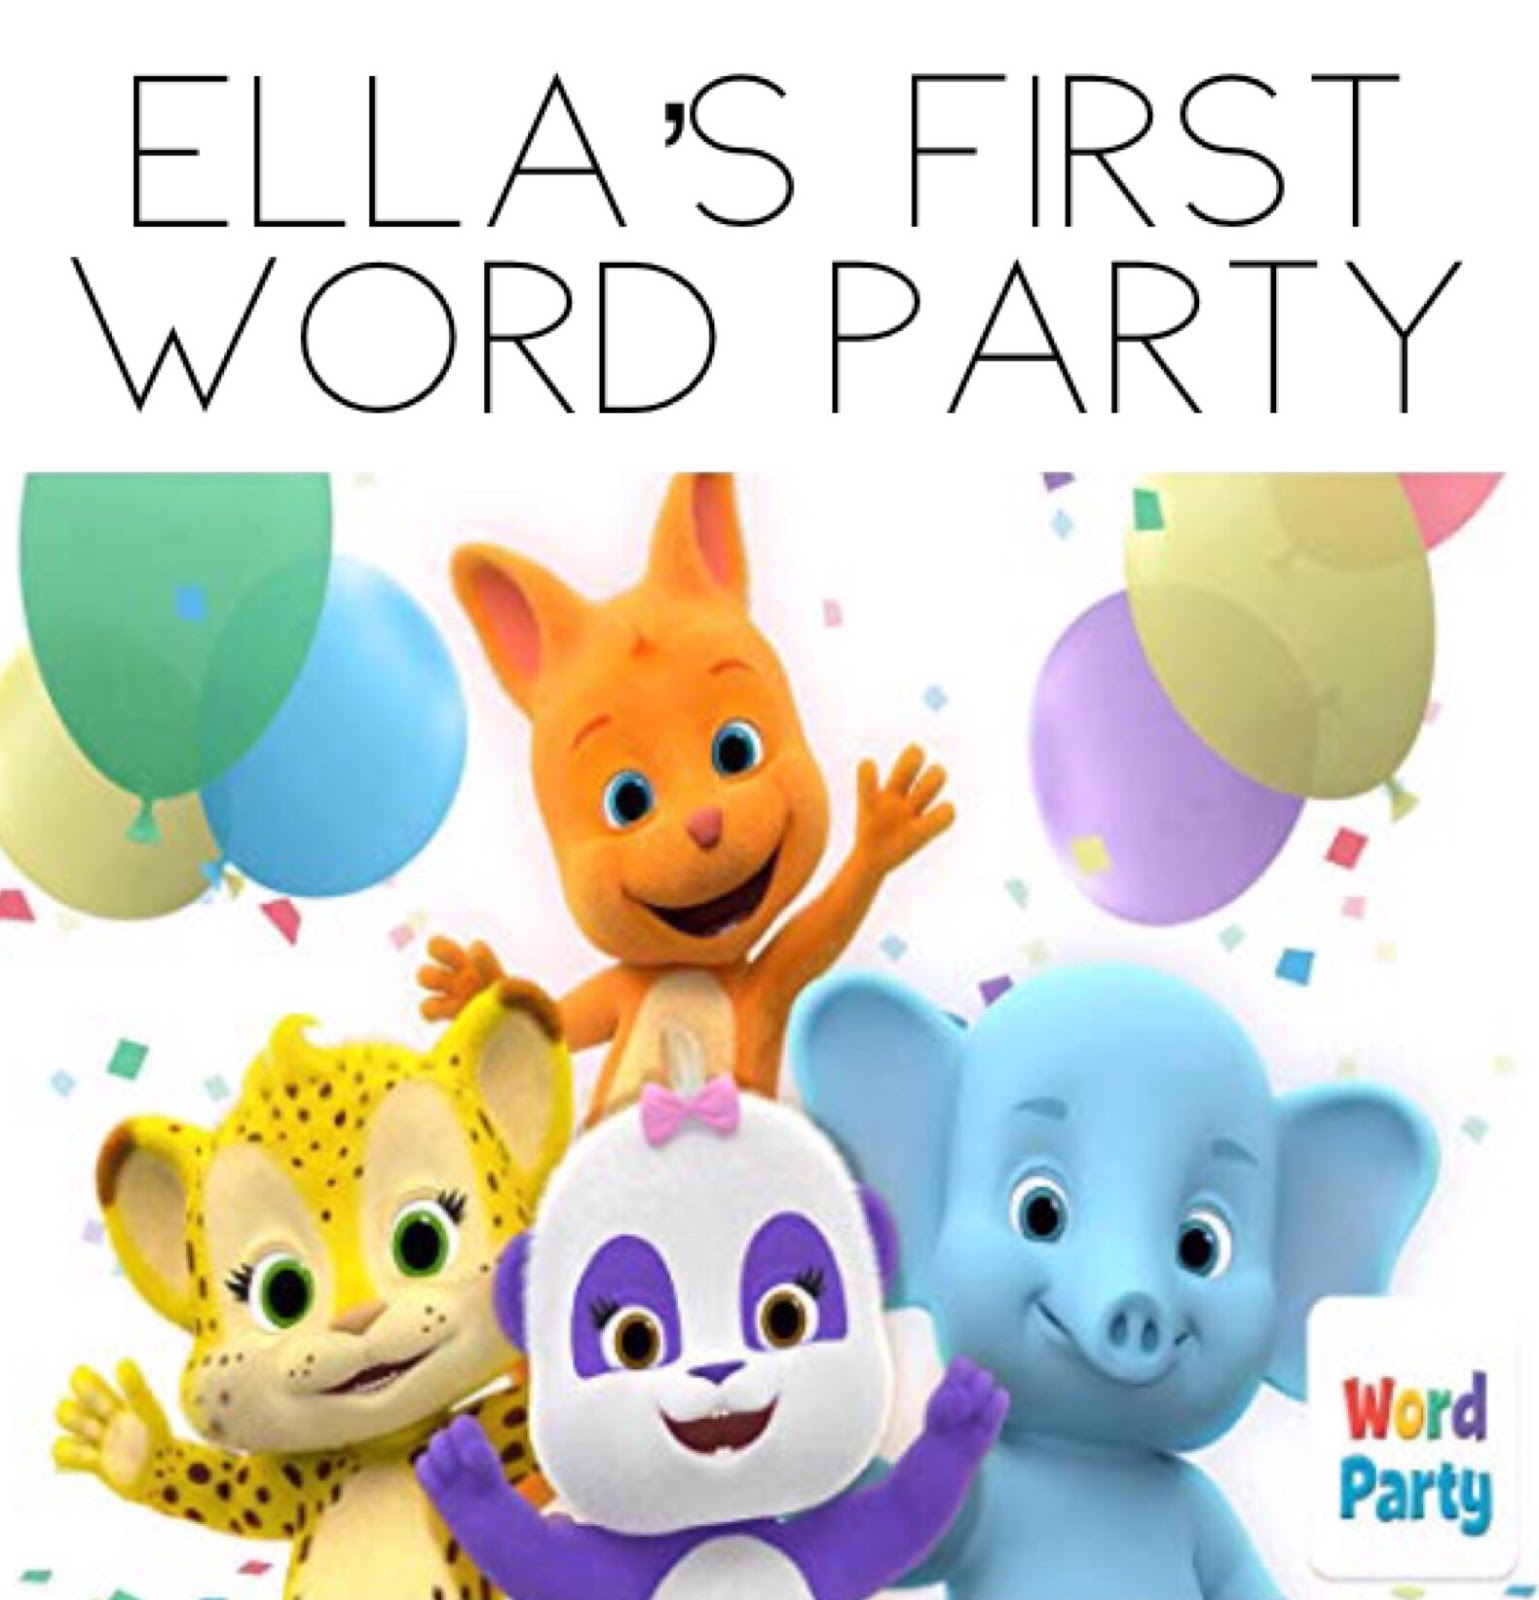  Word Party Birthday Party Supplies, Word Party